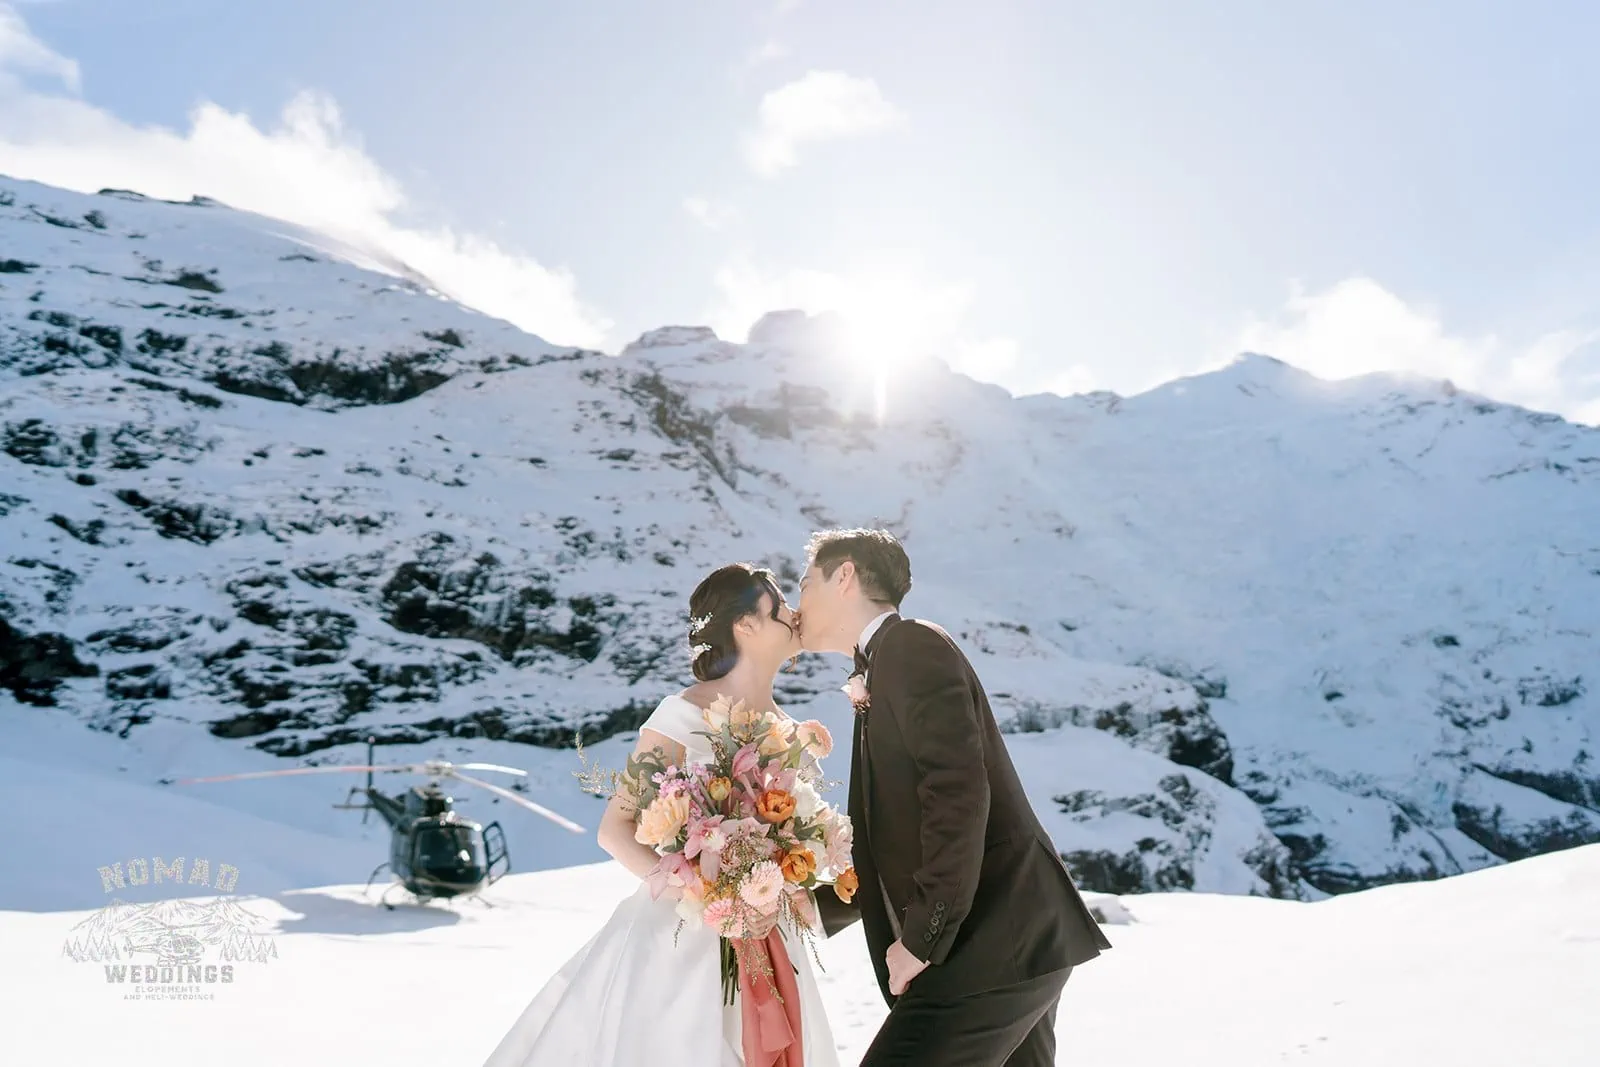 Queenstown New Zealand Elopement Wedding Photographer - A snow-covered mountain serves as the picturesque backdrop for Bo and Junyi during their Heli Pre Wedding Shoot with 4 landings.